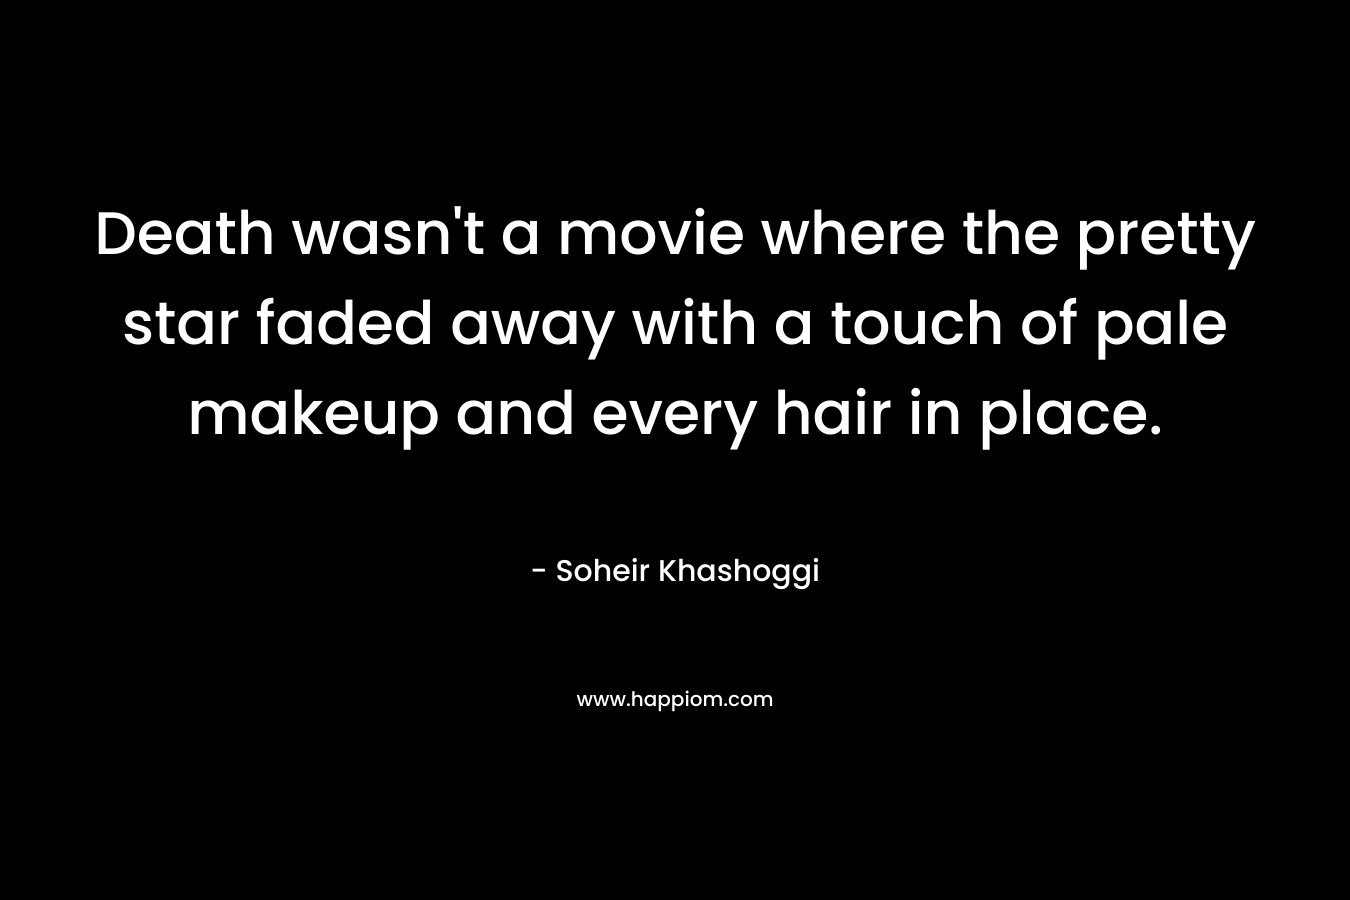 Death wasn’t a movie where the pretty star faded away with a touch of pale makeup and every hair in place. – Soheir Khashoggi